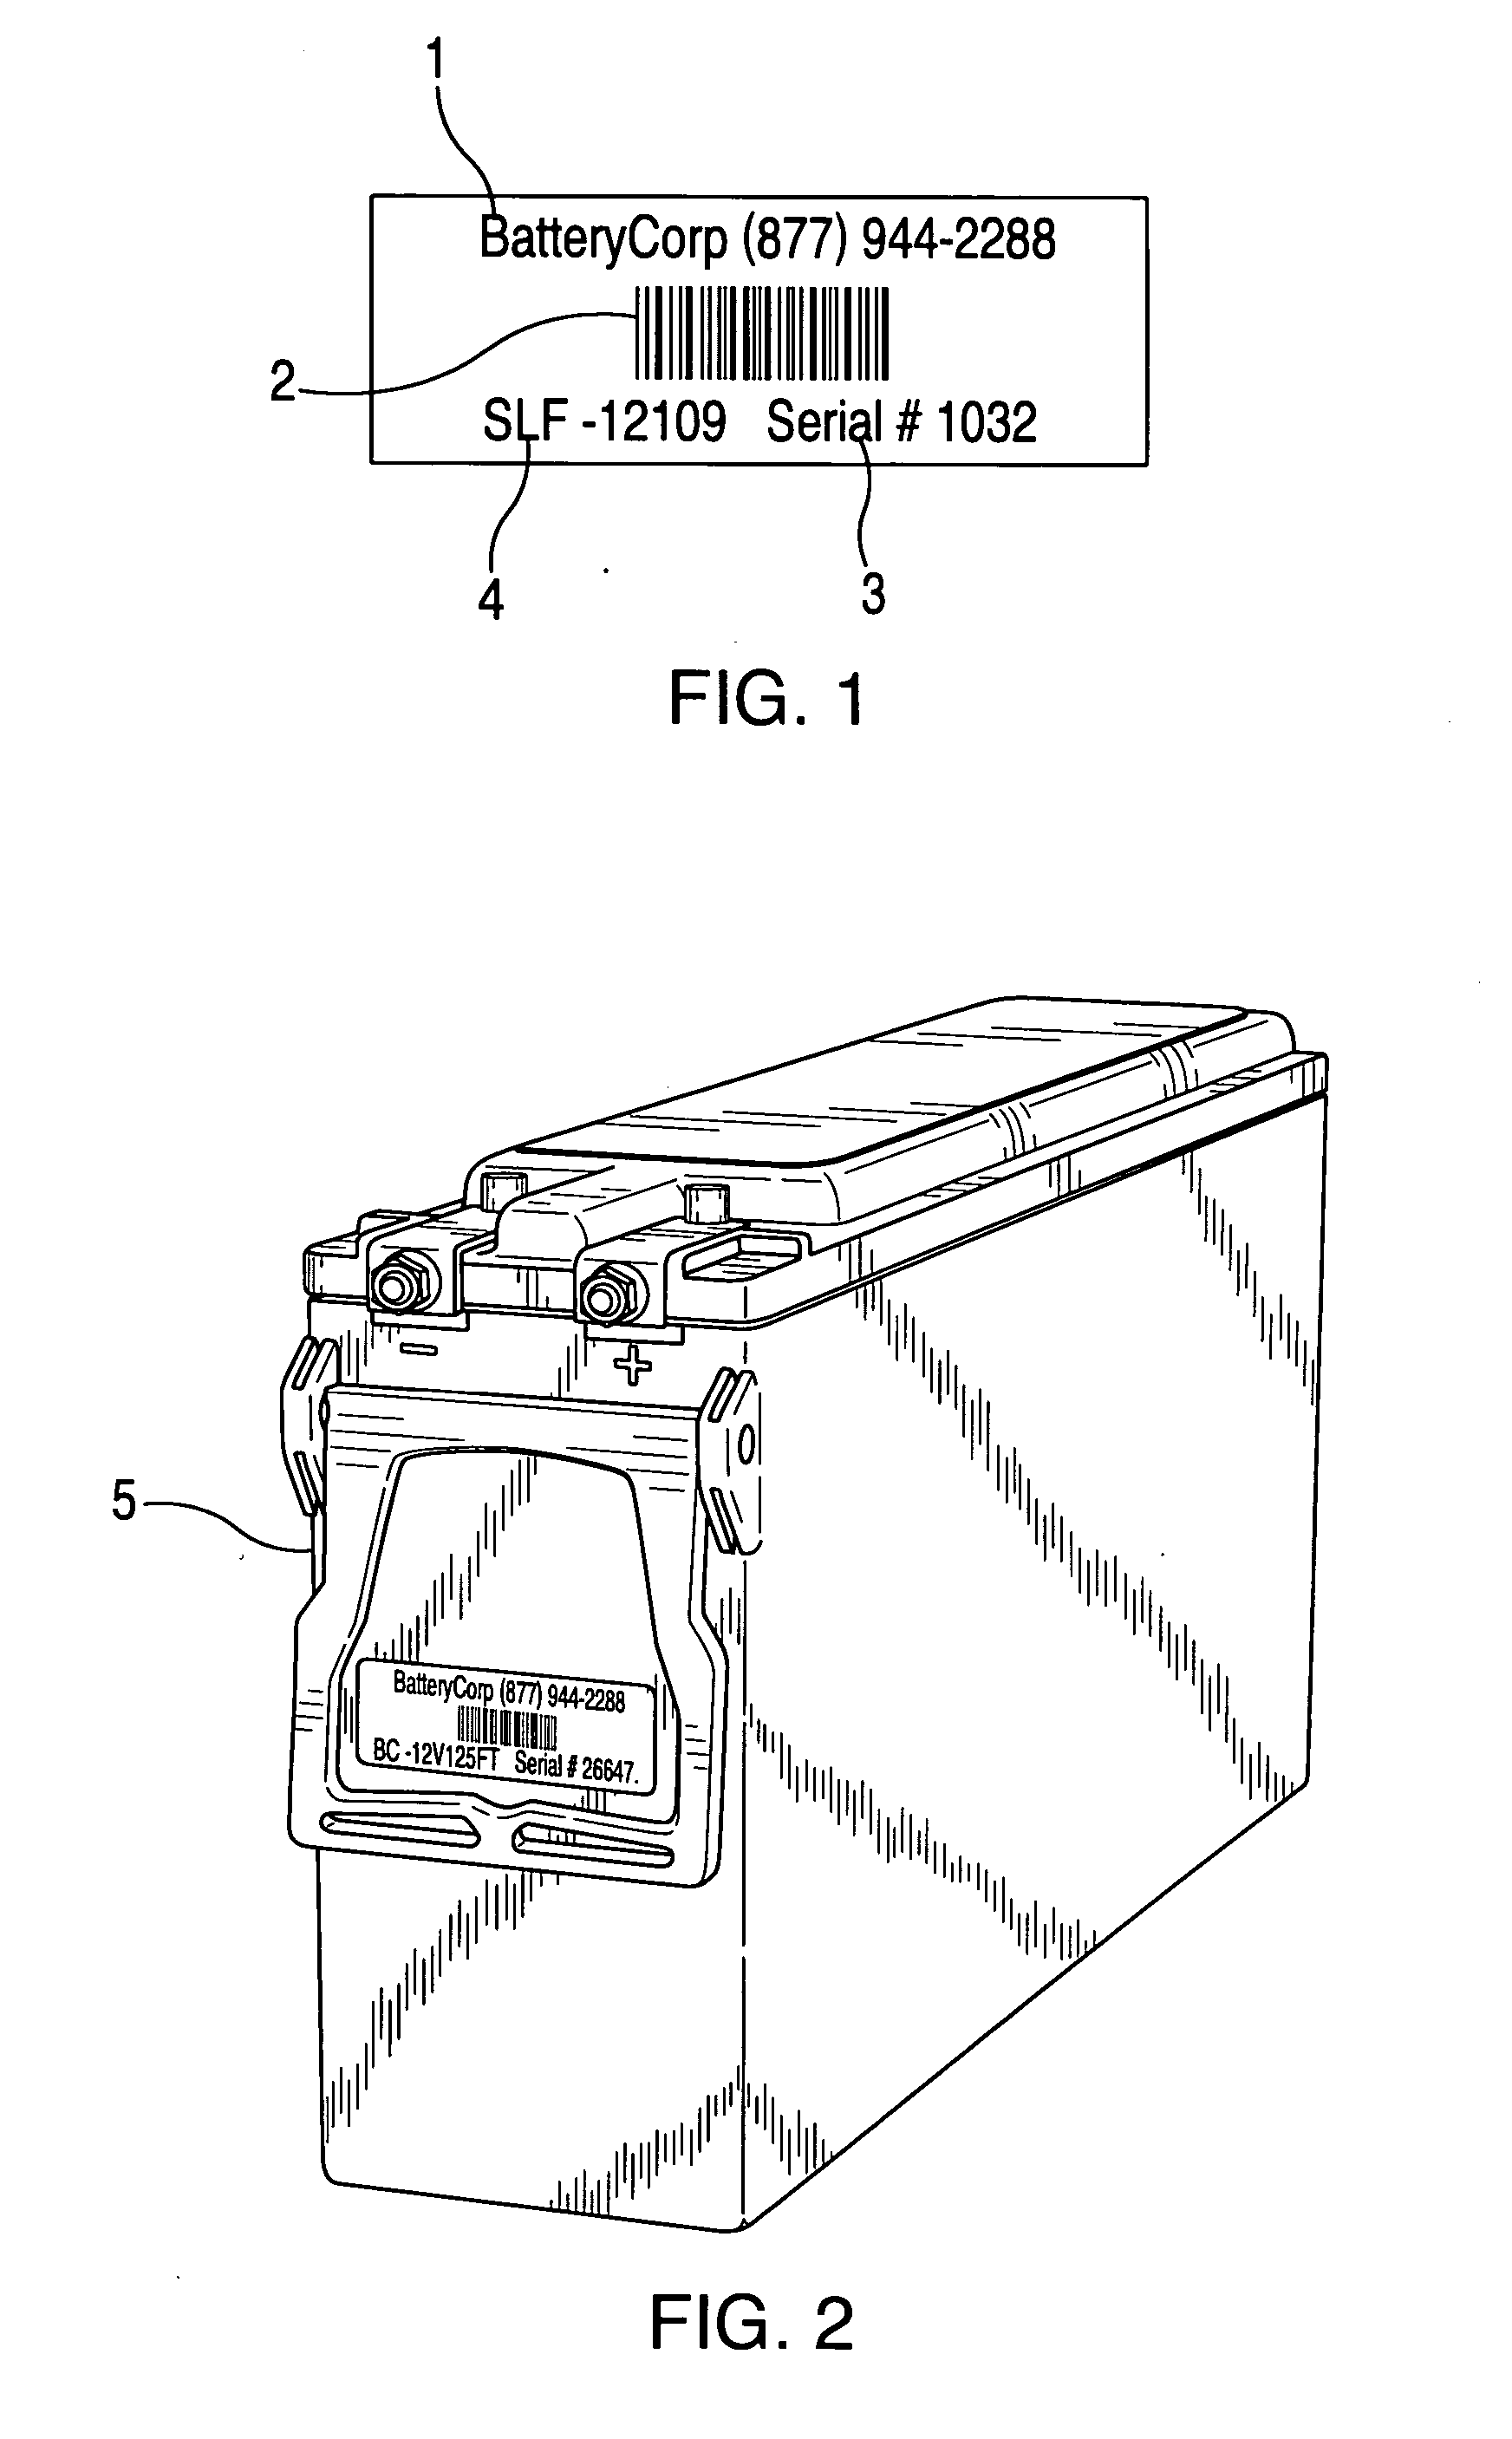 Battery management system and apparatus with runtime analysis reporting